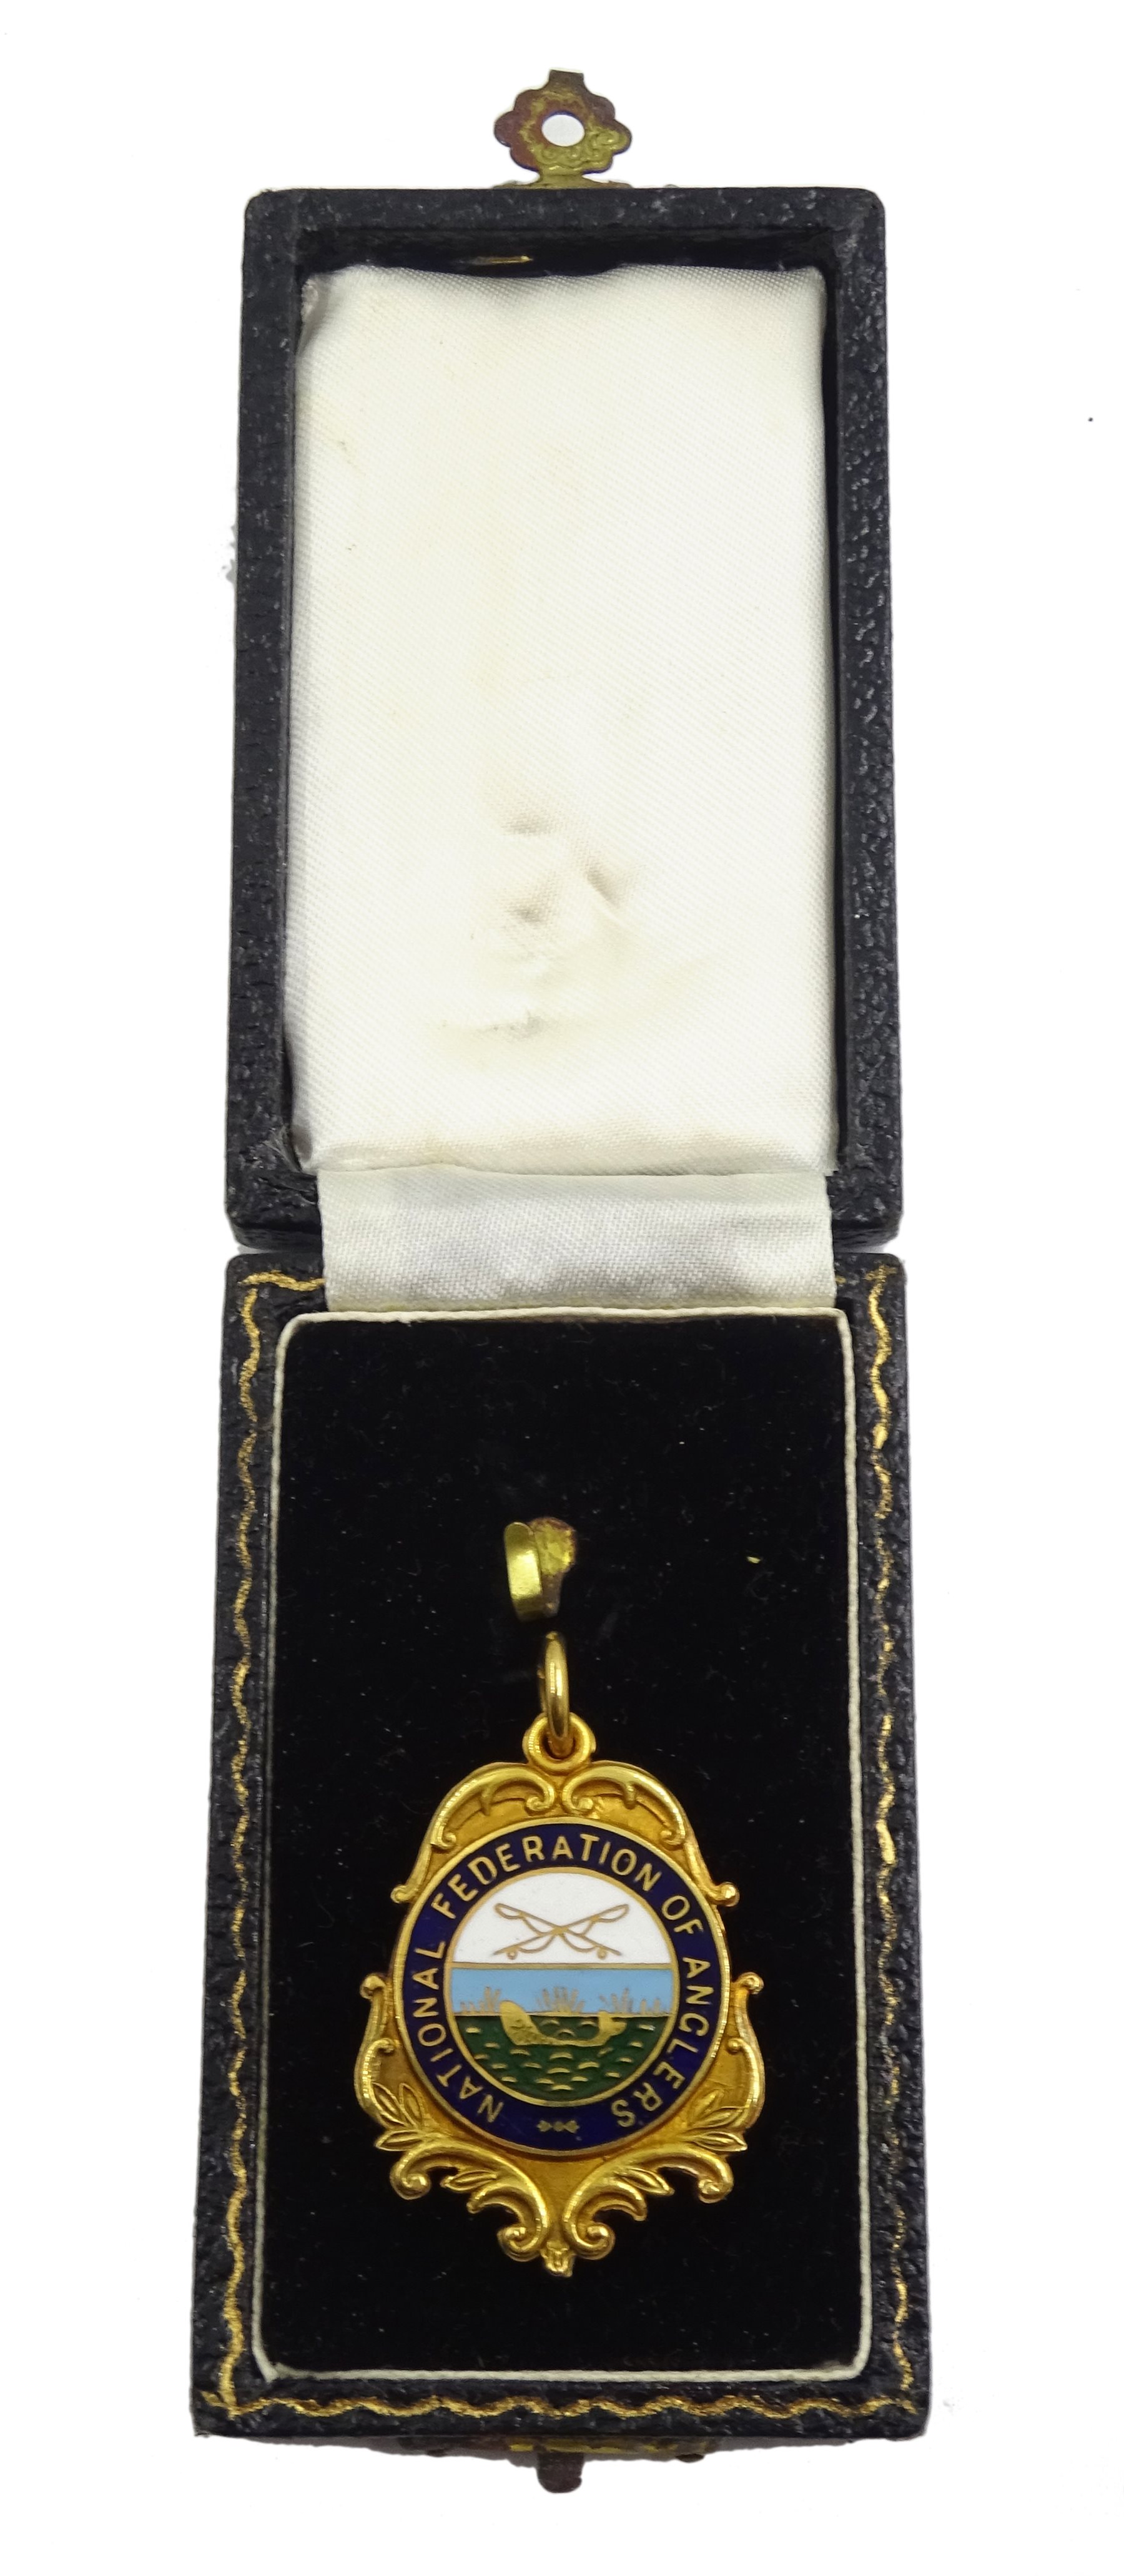 9ct gold and enamel 'National Federation of Anglers' presentation medallion, makers mark HM, Birming - Image 2 of 4